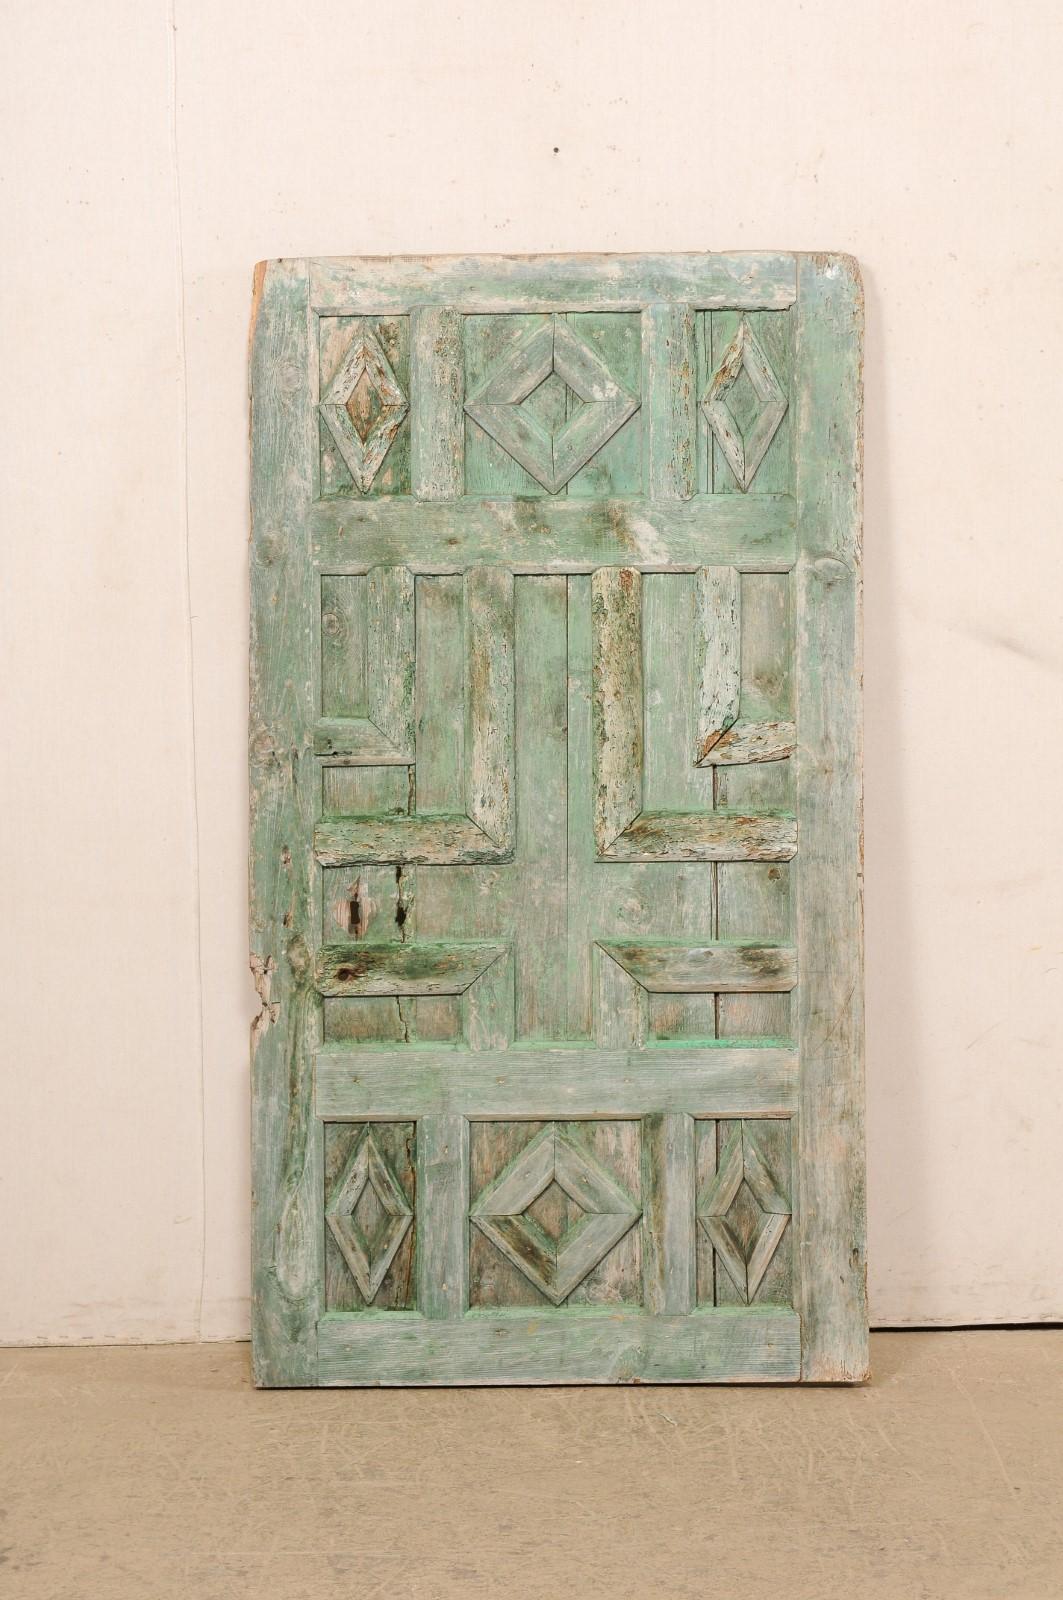 A Spanish painted decoratively paneled wood door from the 19th century. This antique door from Spain has been designed with raised panels; in various geometric designs, creating a unique and pleasing pattern. The front / decorated side retains its